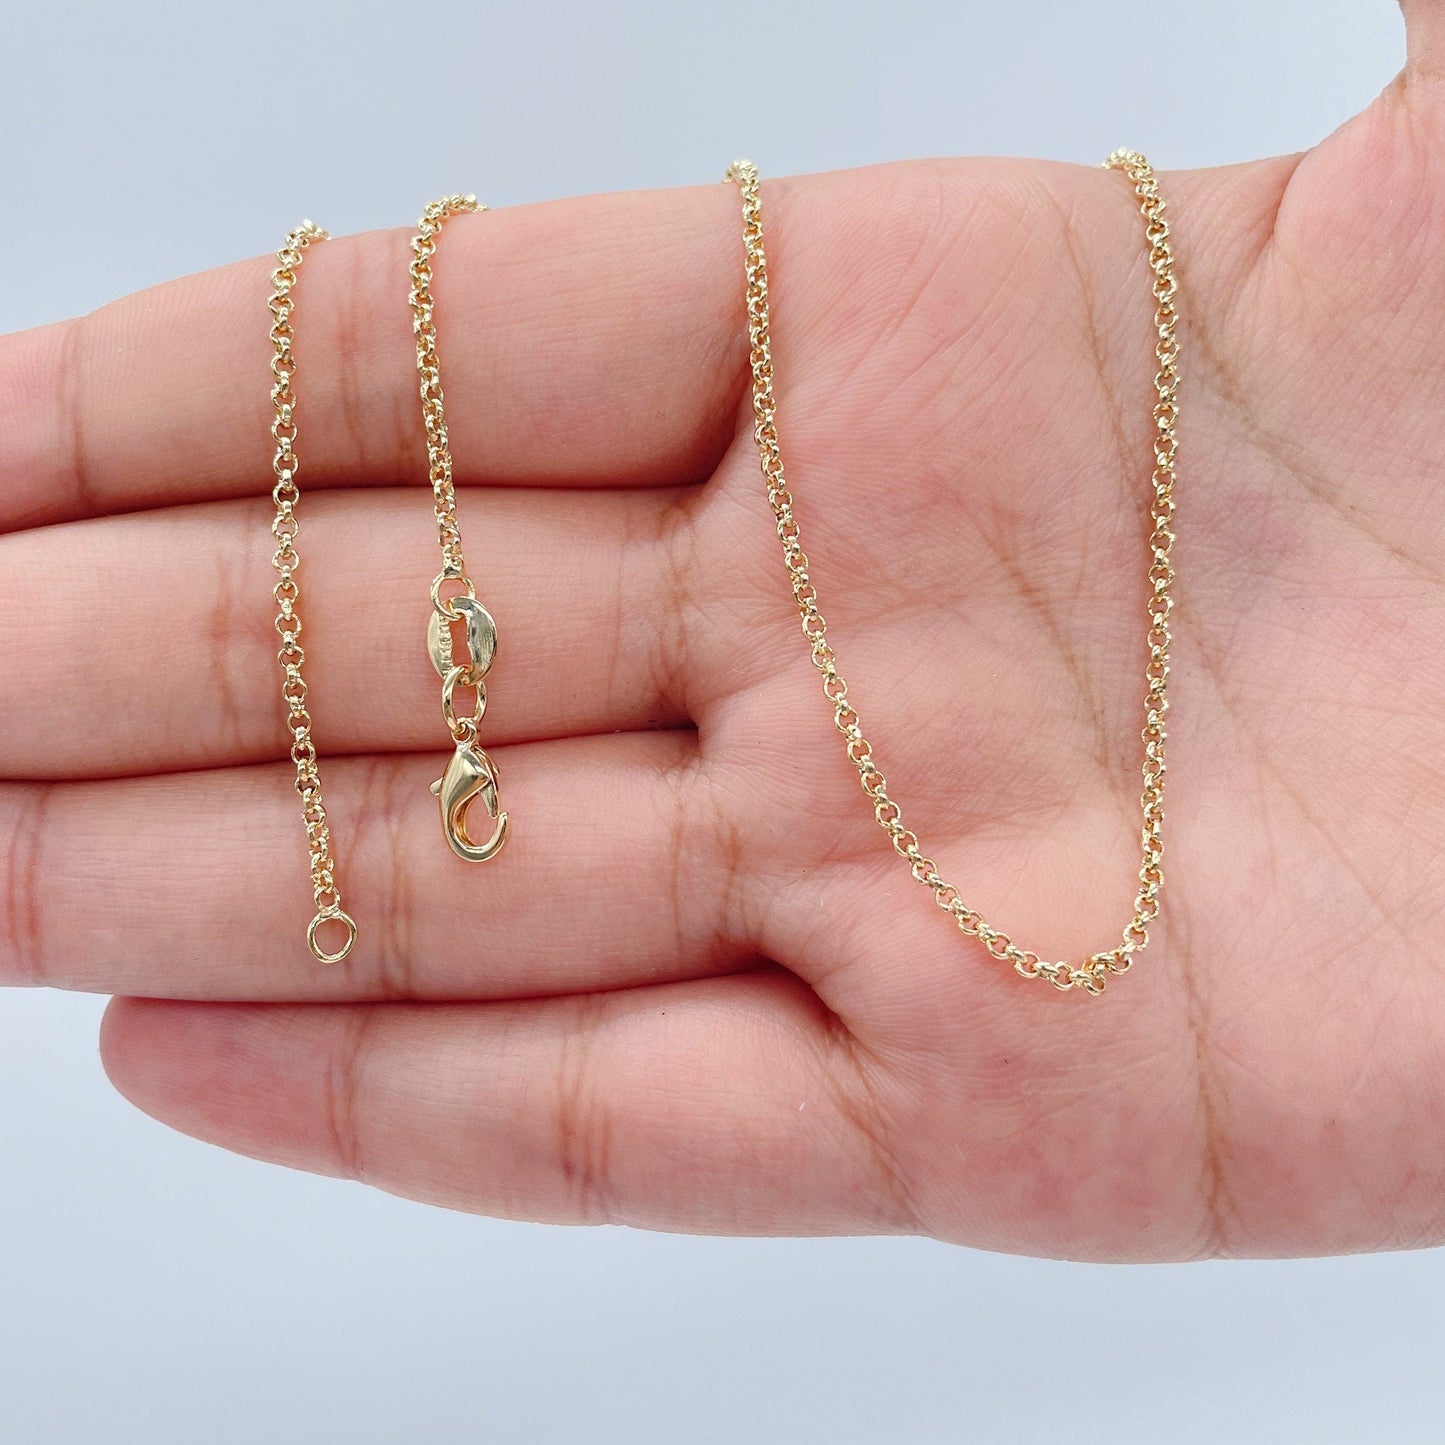 18k Gold Layered 1mm Rolo Chain Necklace for Wholesale Jewelry Making Supplies